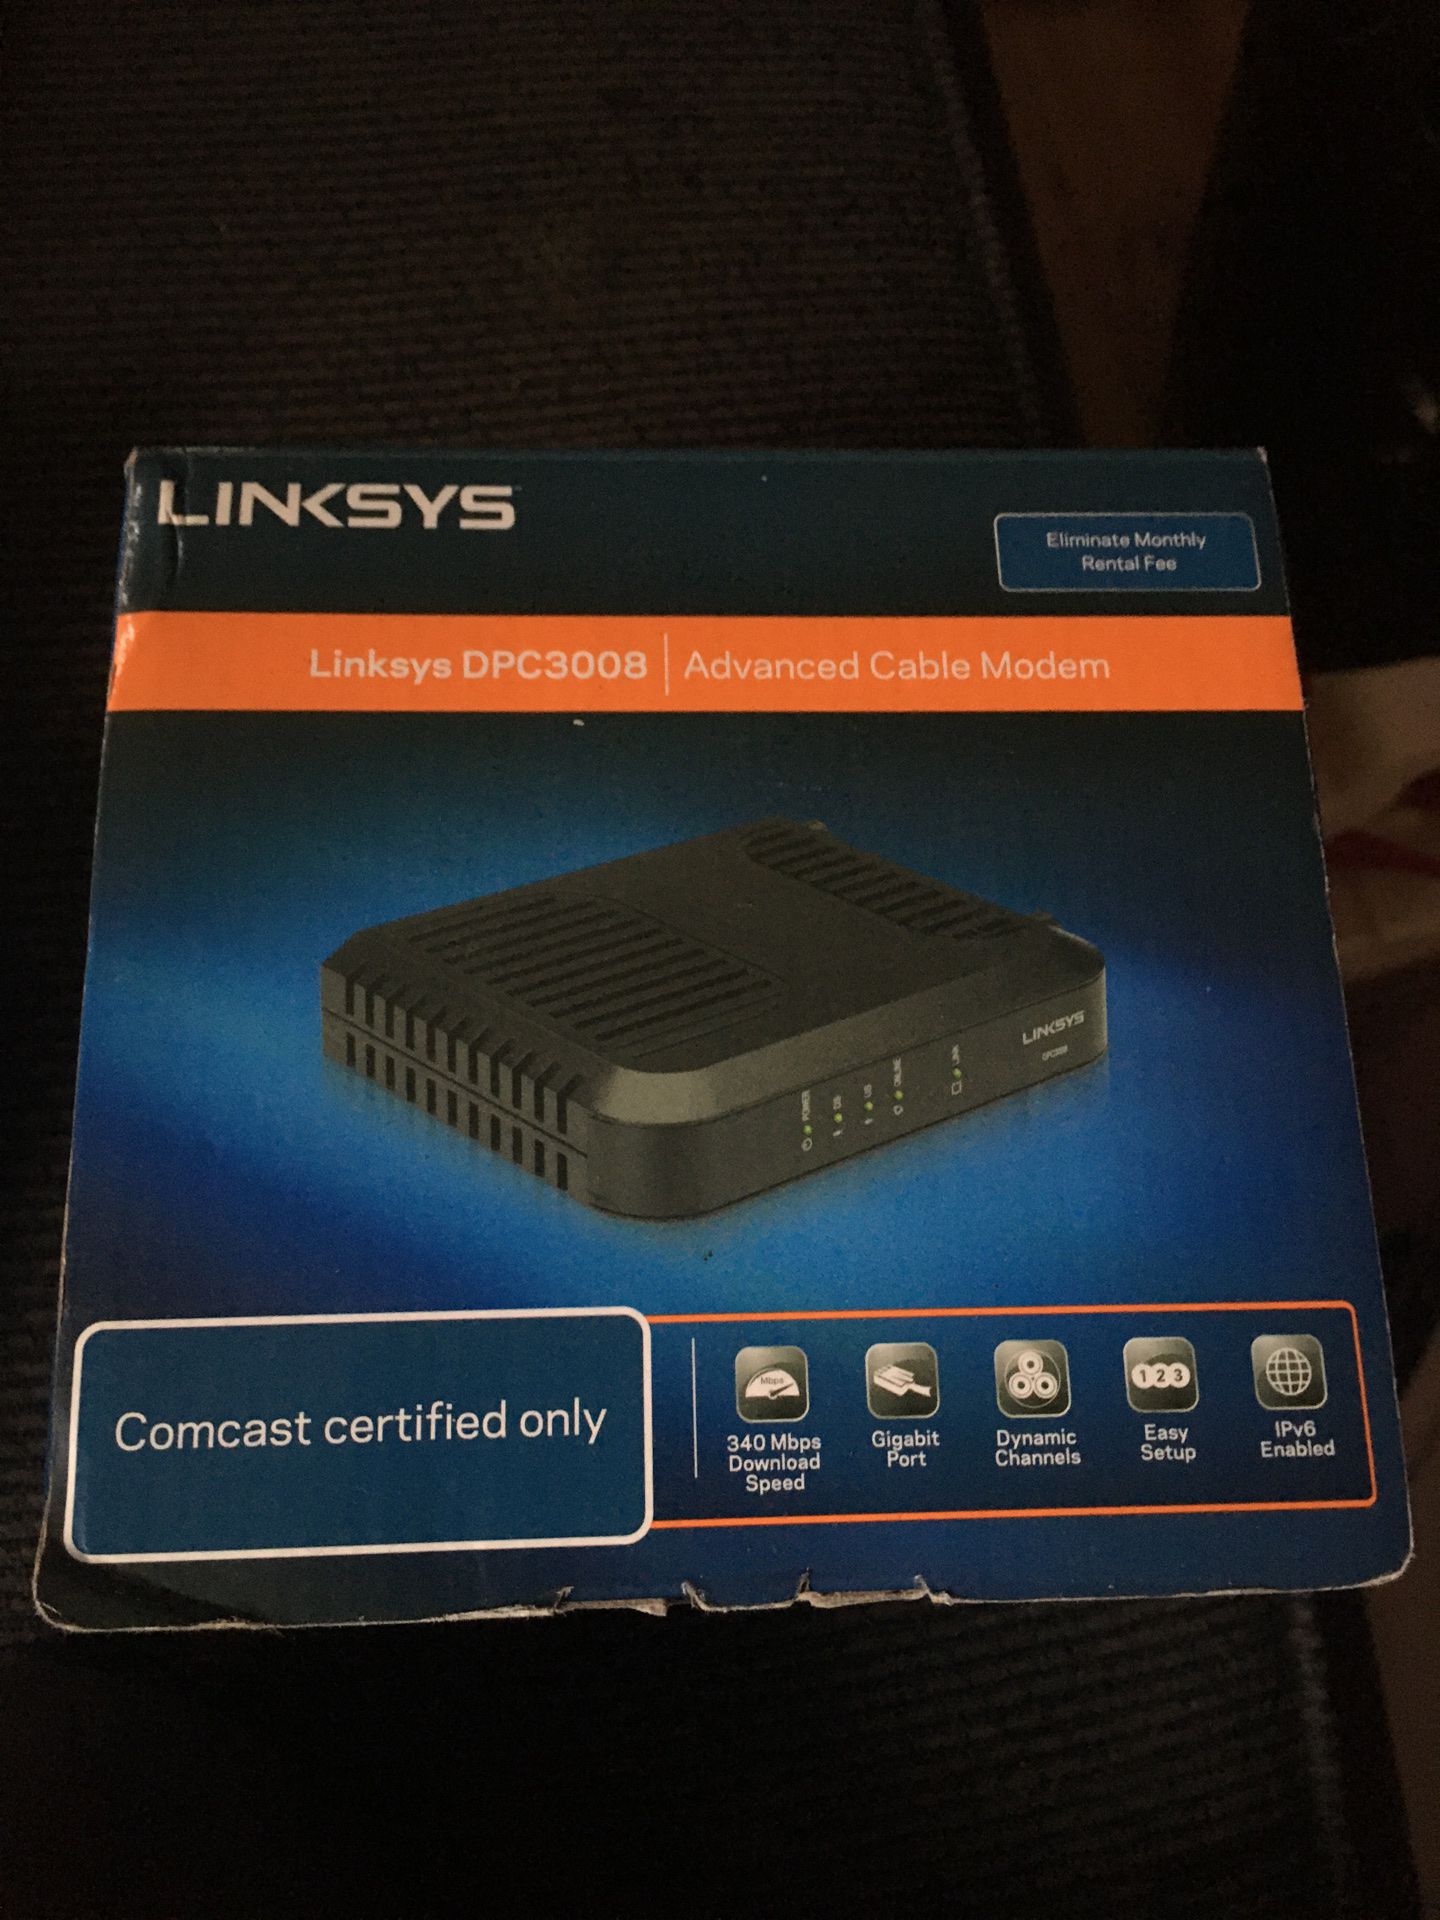 Linksys DPC3008 Comcast certified only